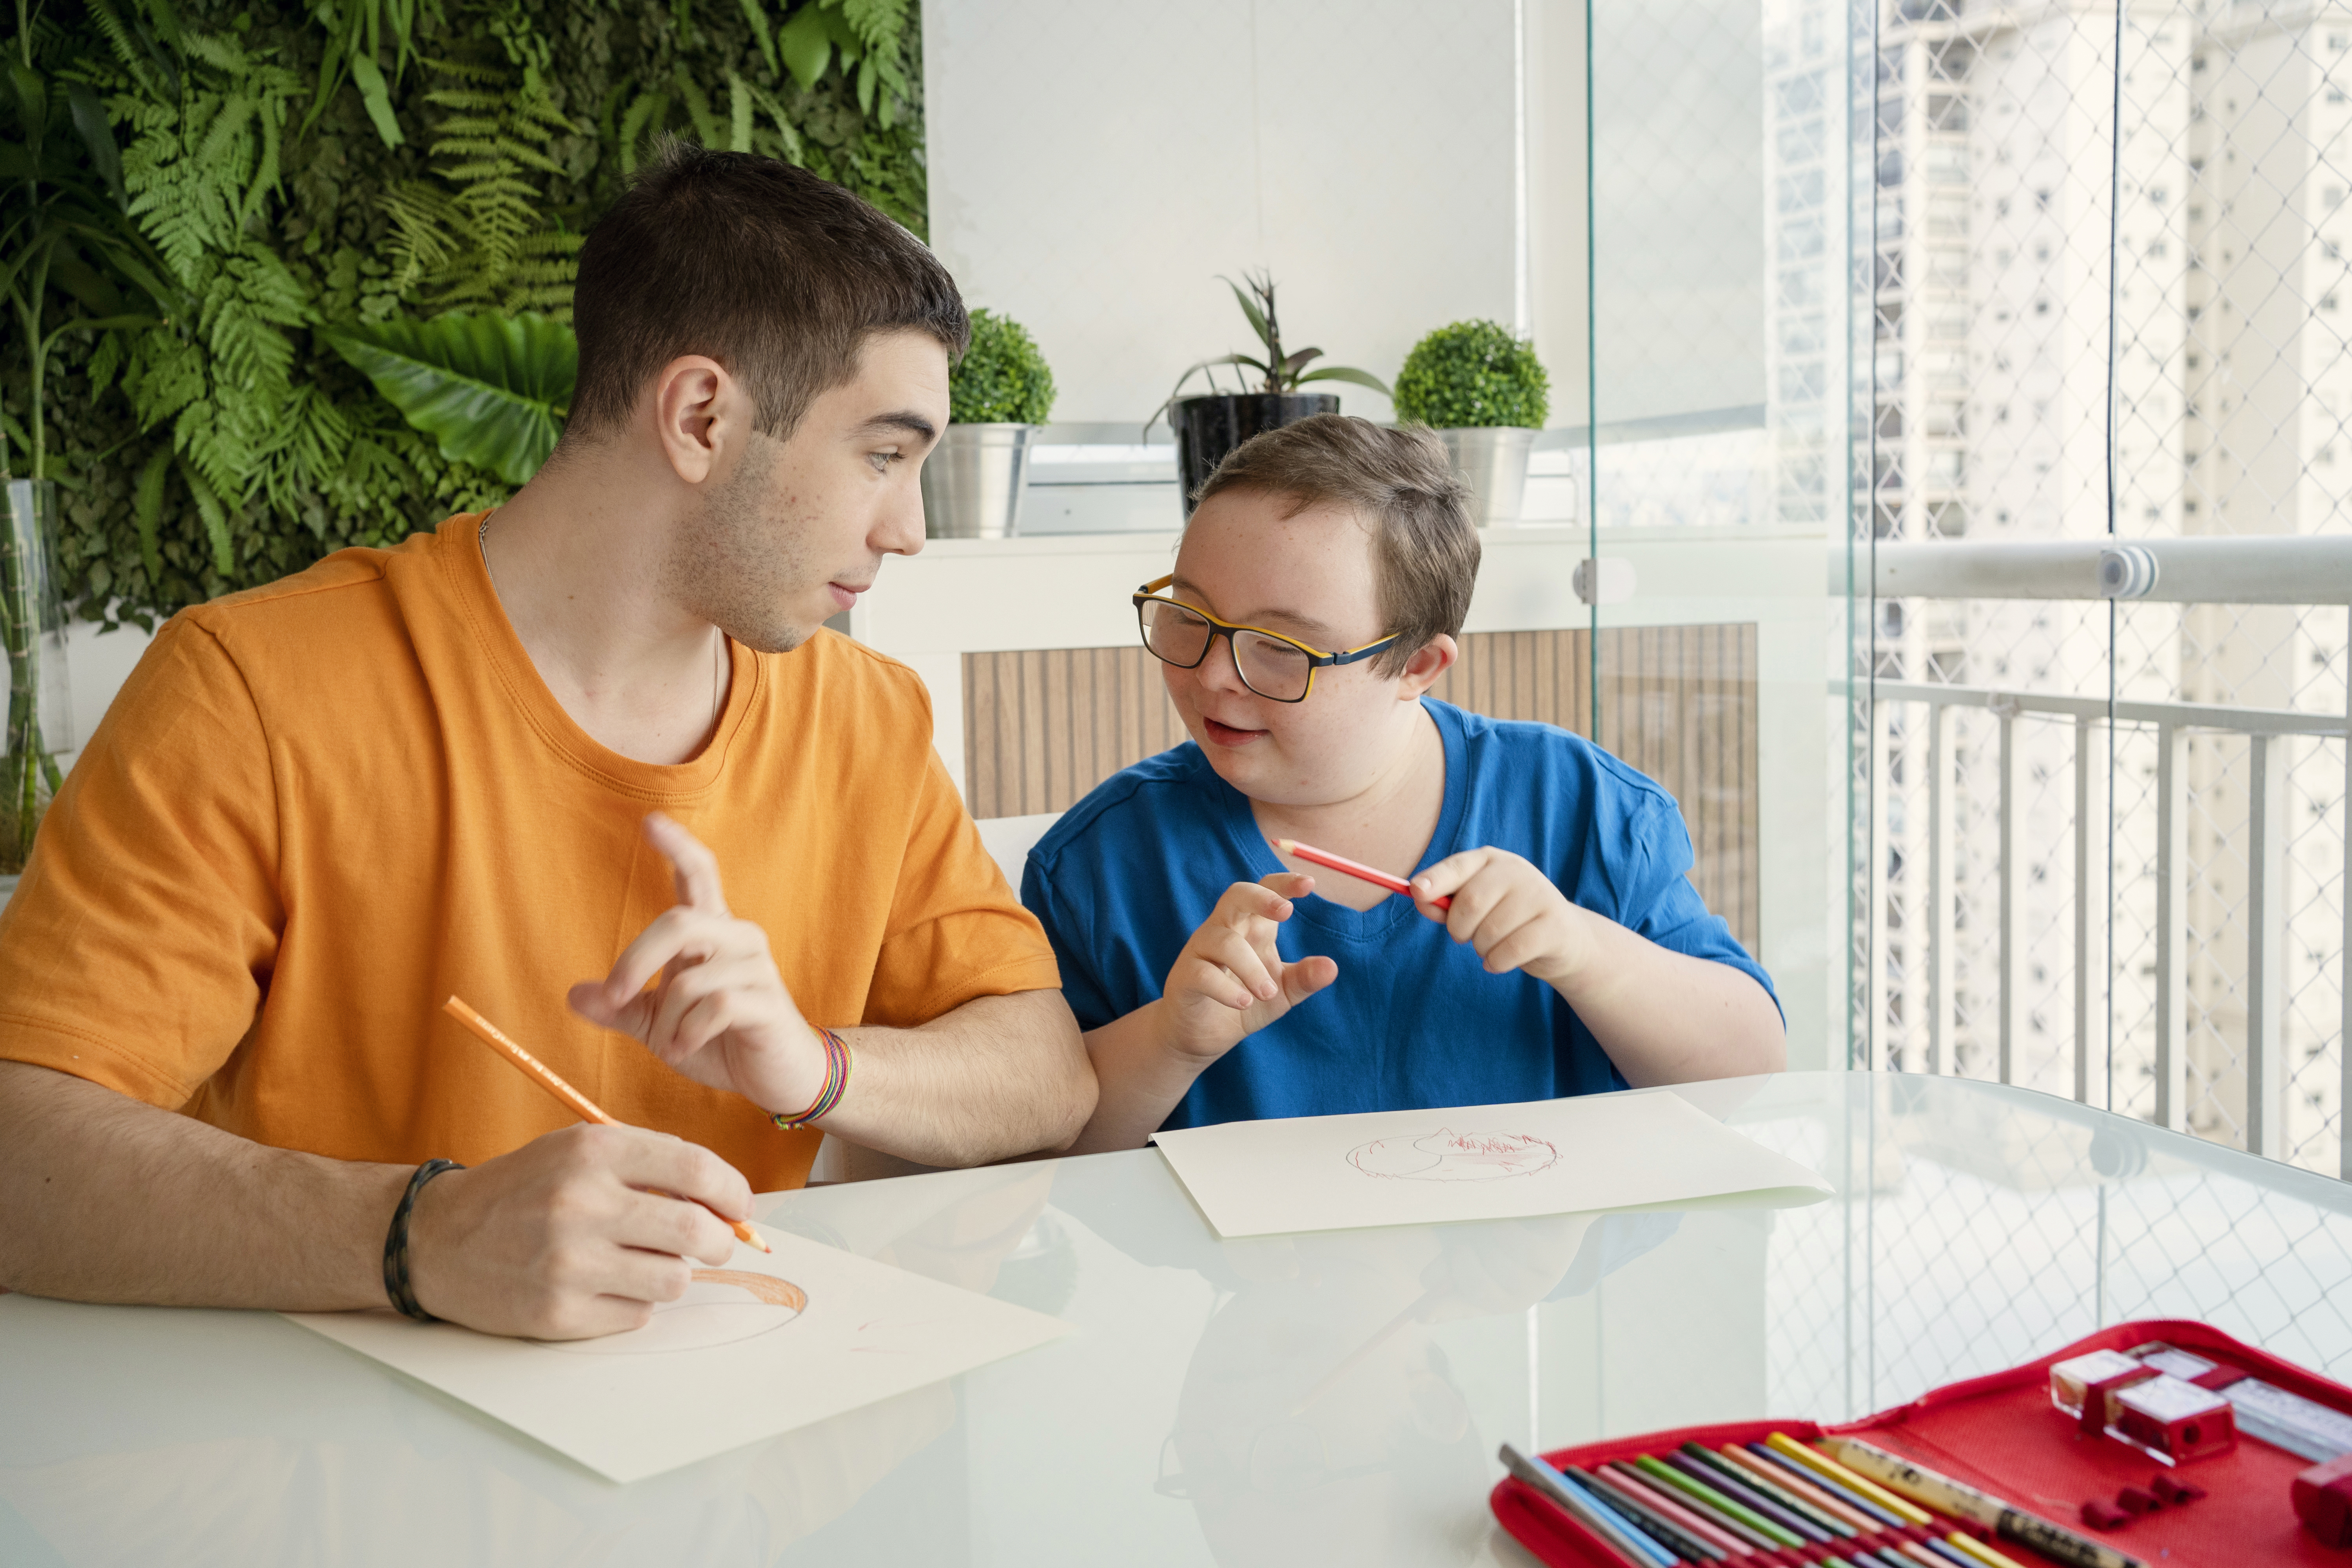 Boy with down syndrome and his brother drawing